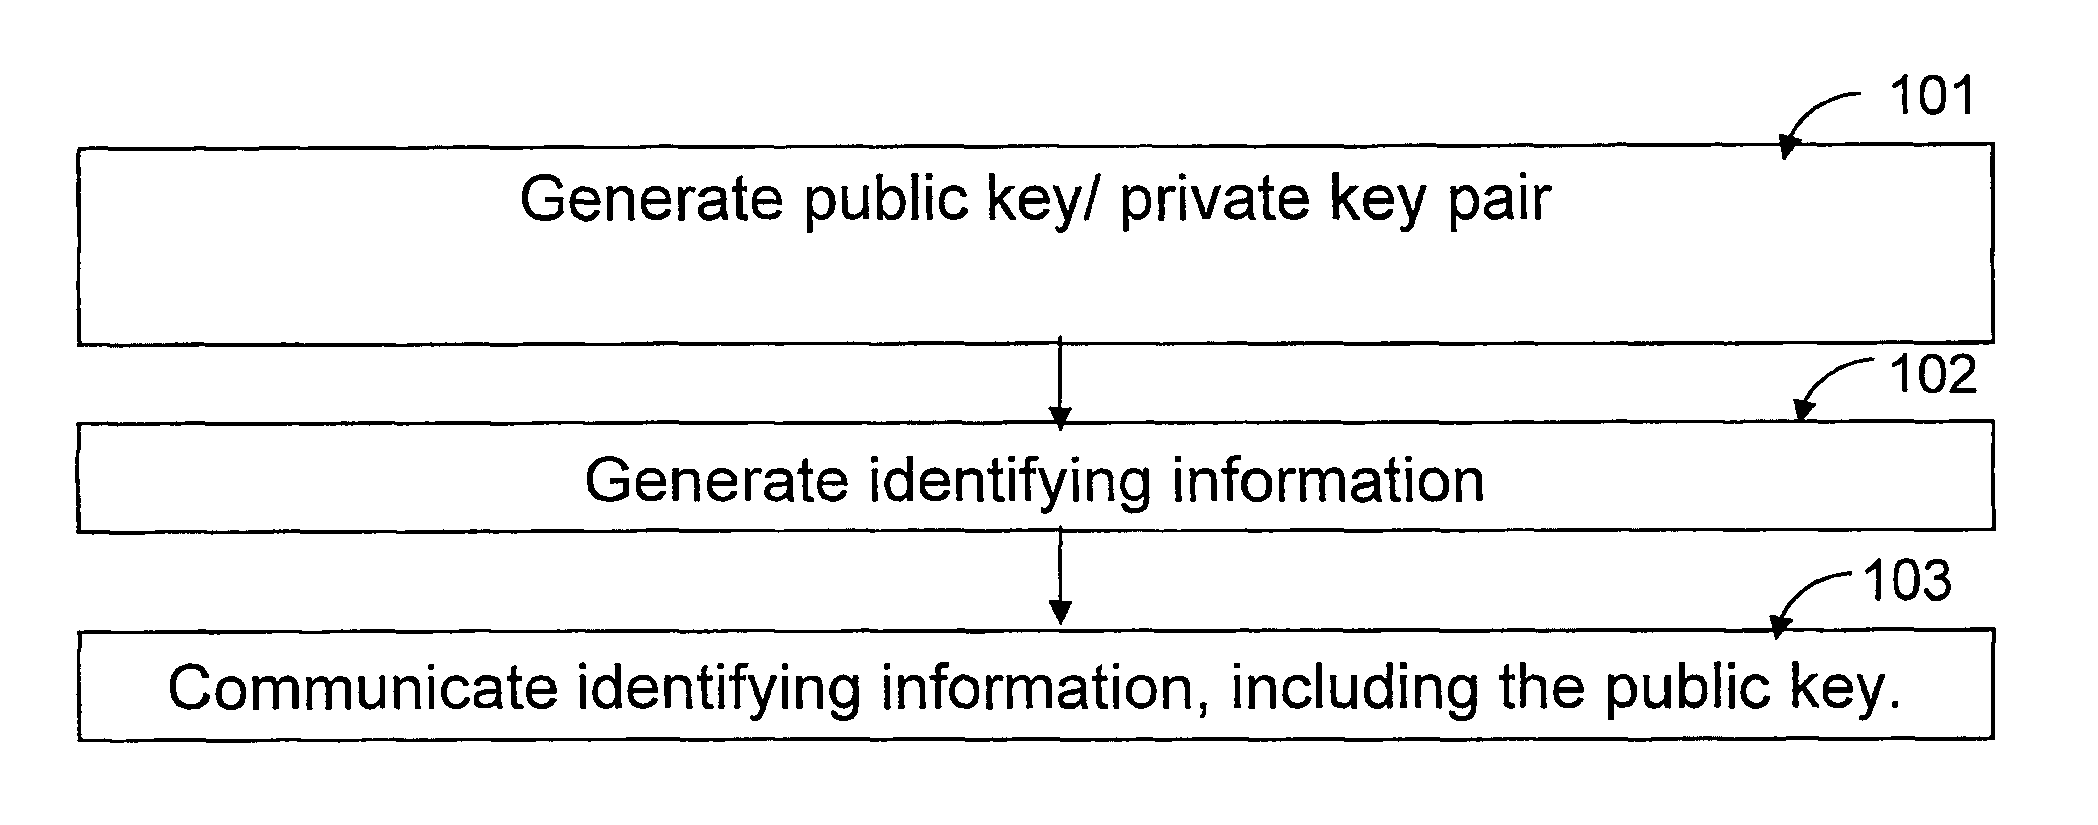 Certificate-based encryption and public key infrastructure